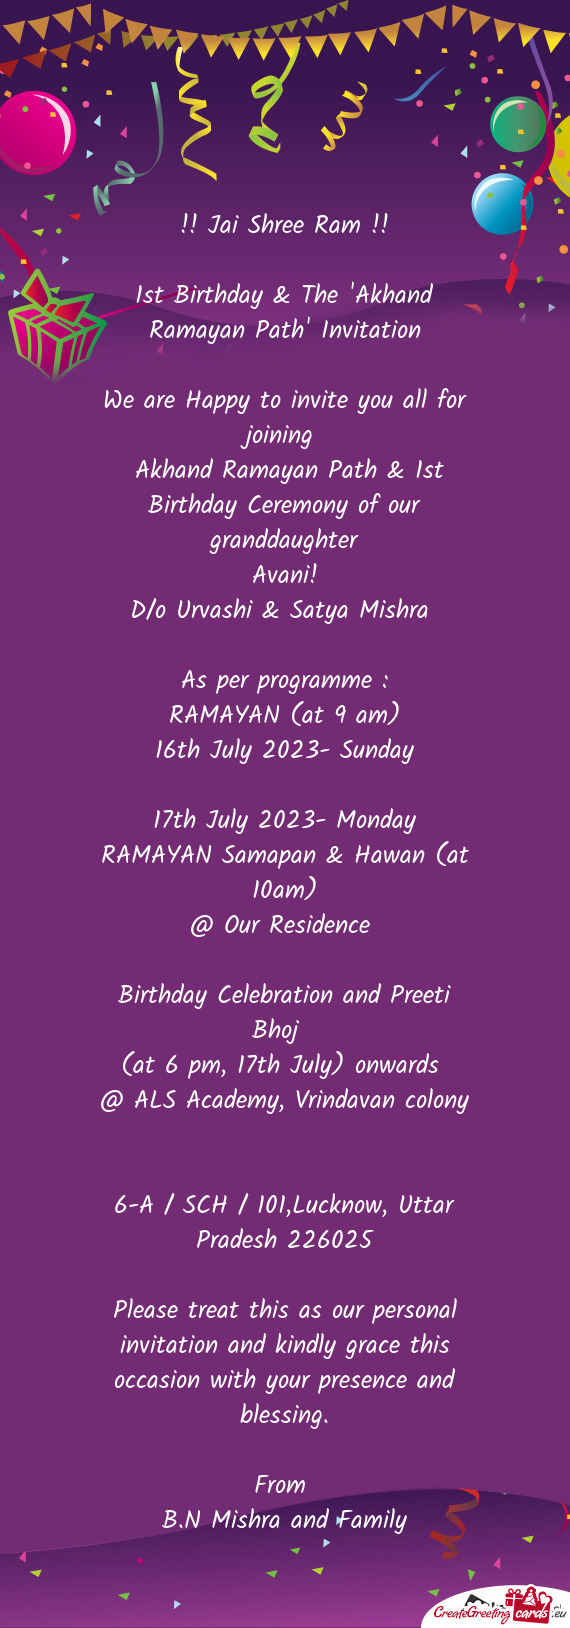 You all for joining Akhand Ramayan Path & 1st Birthday Ceremony of our granddaughter Avani! D/